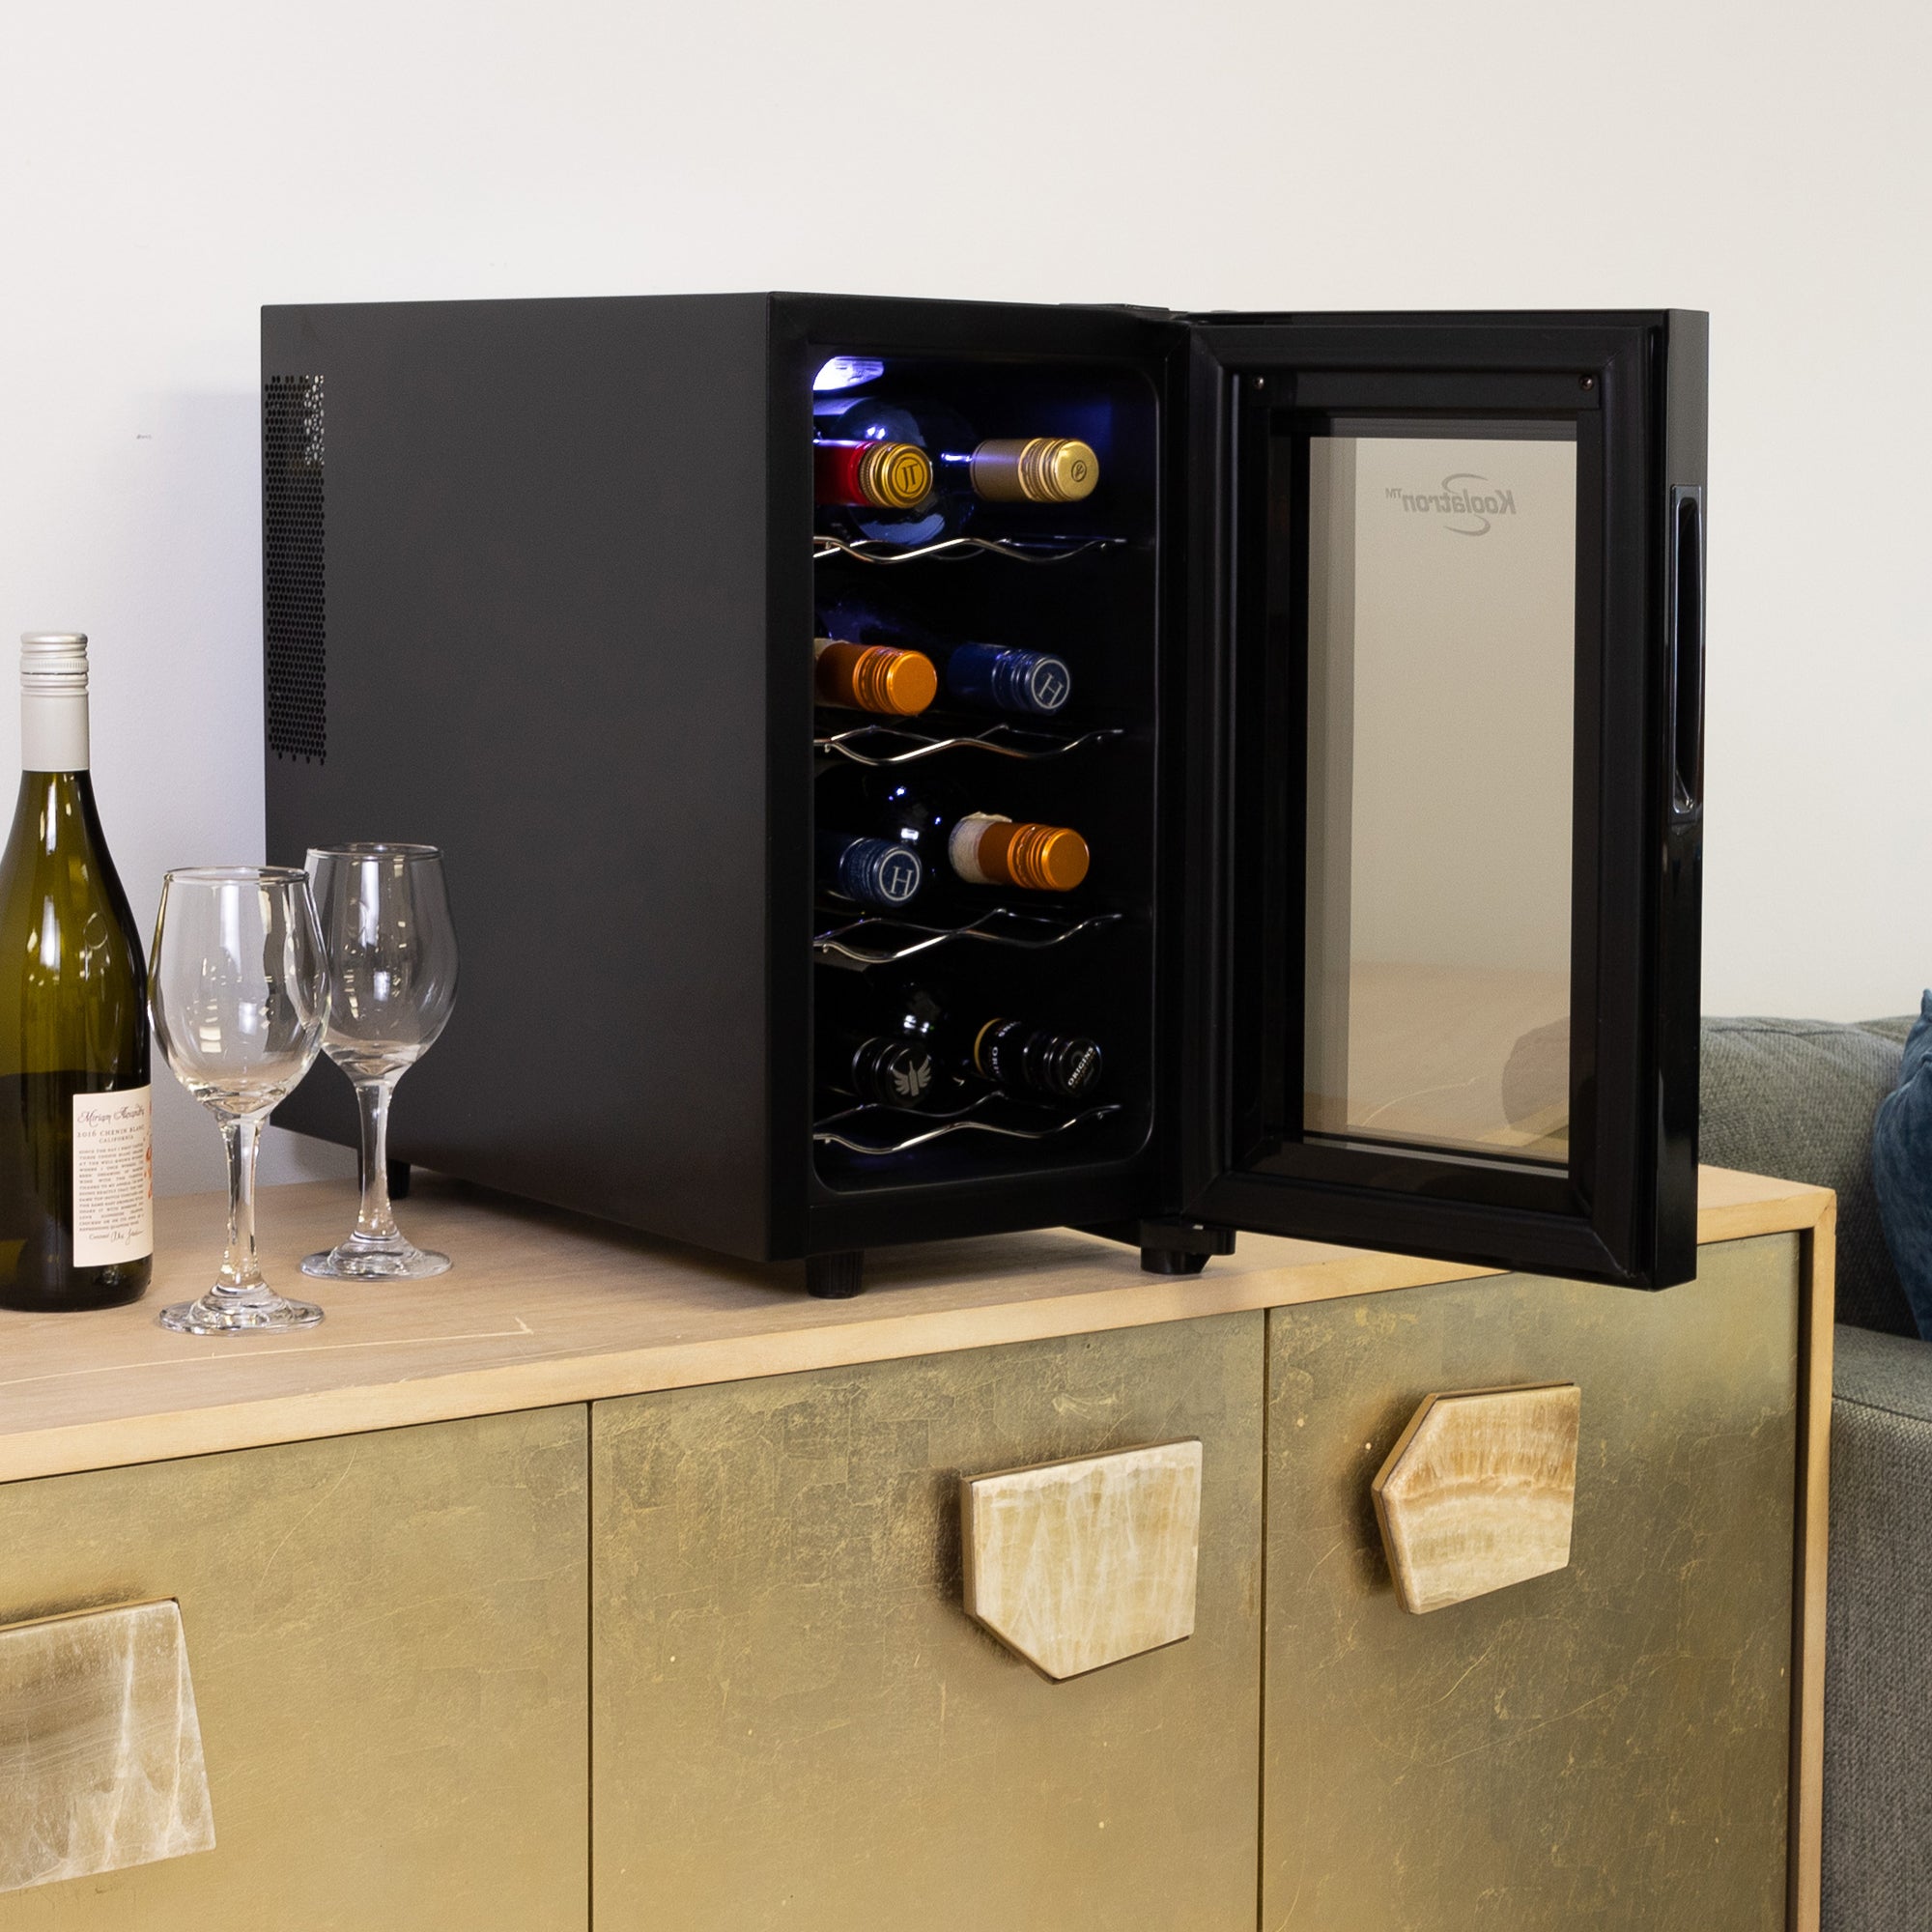 Koolatron 8 bottle wine cooler, open and filled with bottles of wine, on a gold-colored sideboard beside a gray sofa. There is a bottle of wine and two glasses to the left of the cooler